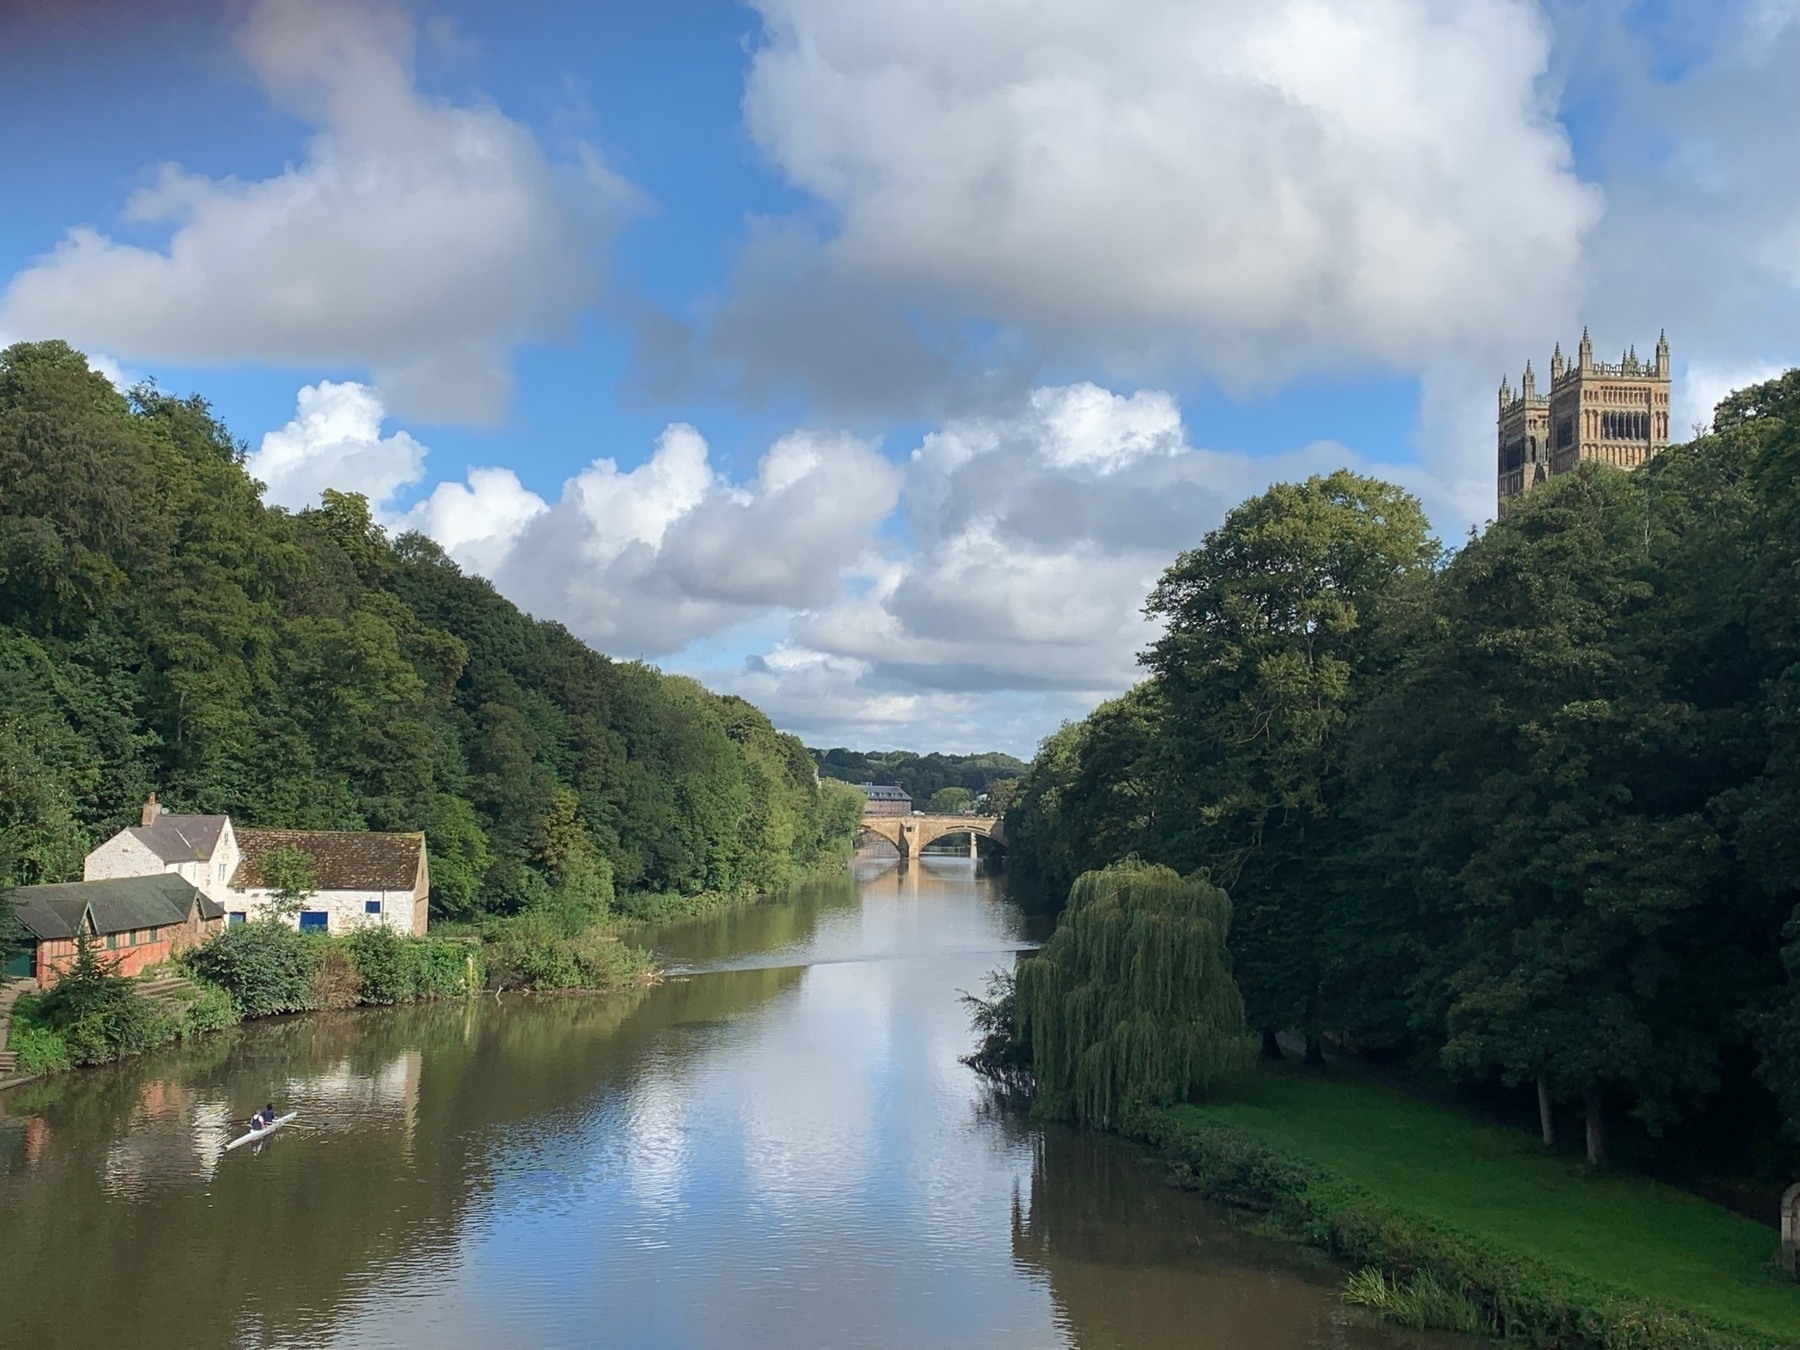 A view from a bridge crossing the River Wear. Trees line both banks. A double scull boat is in the water. Durham Cathedral peaks out from behind the treetops on the right riverbank.